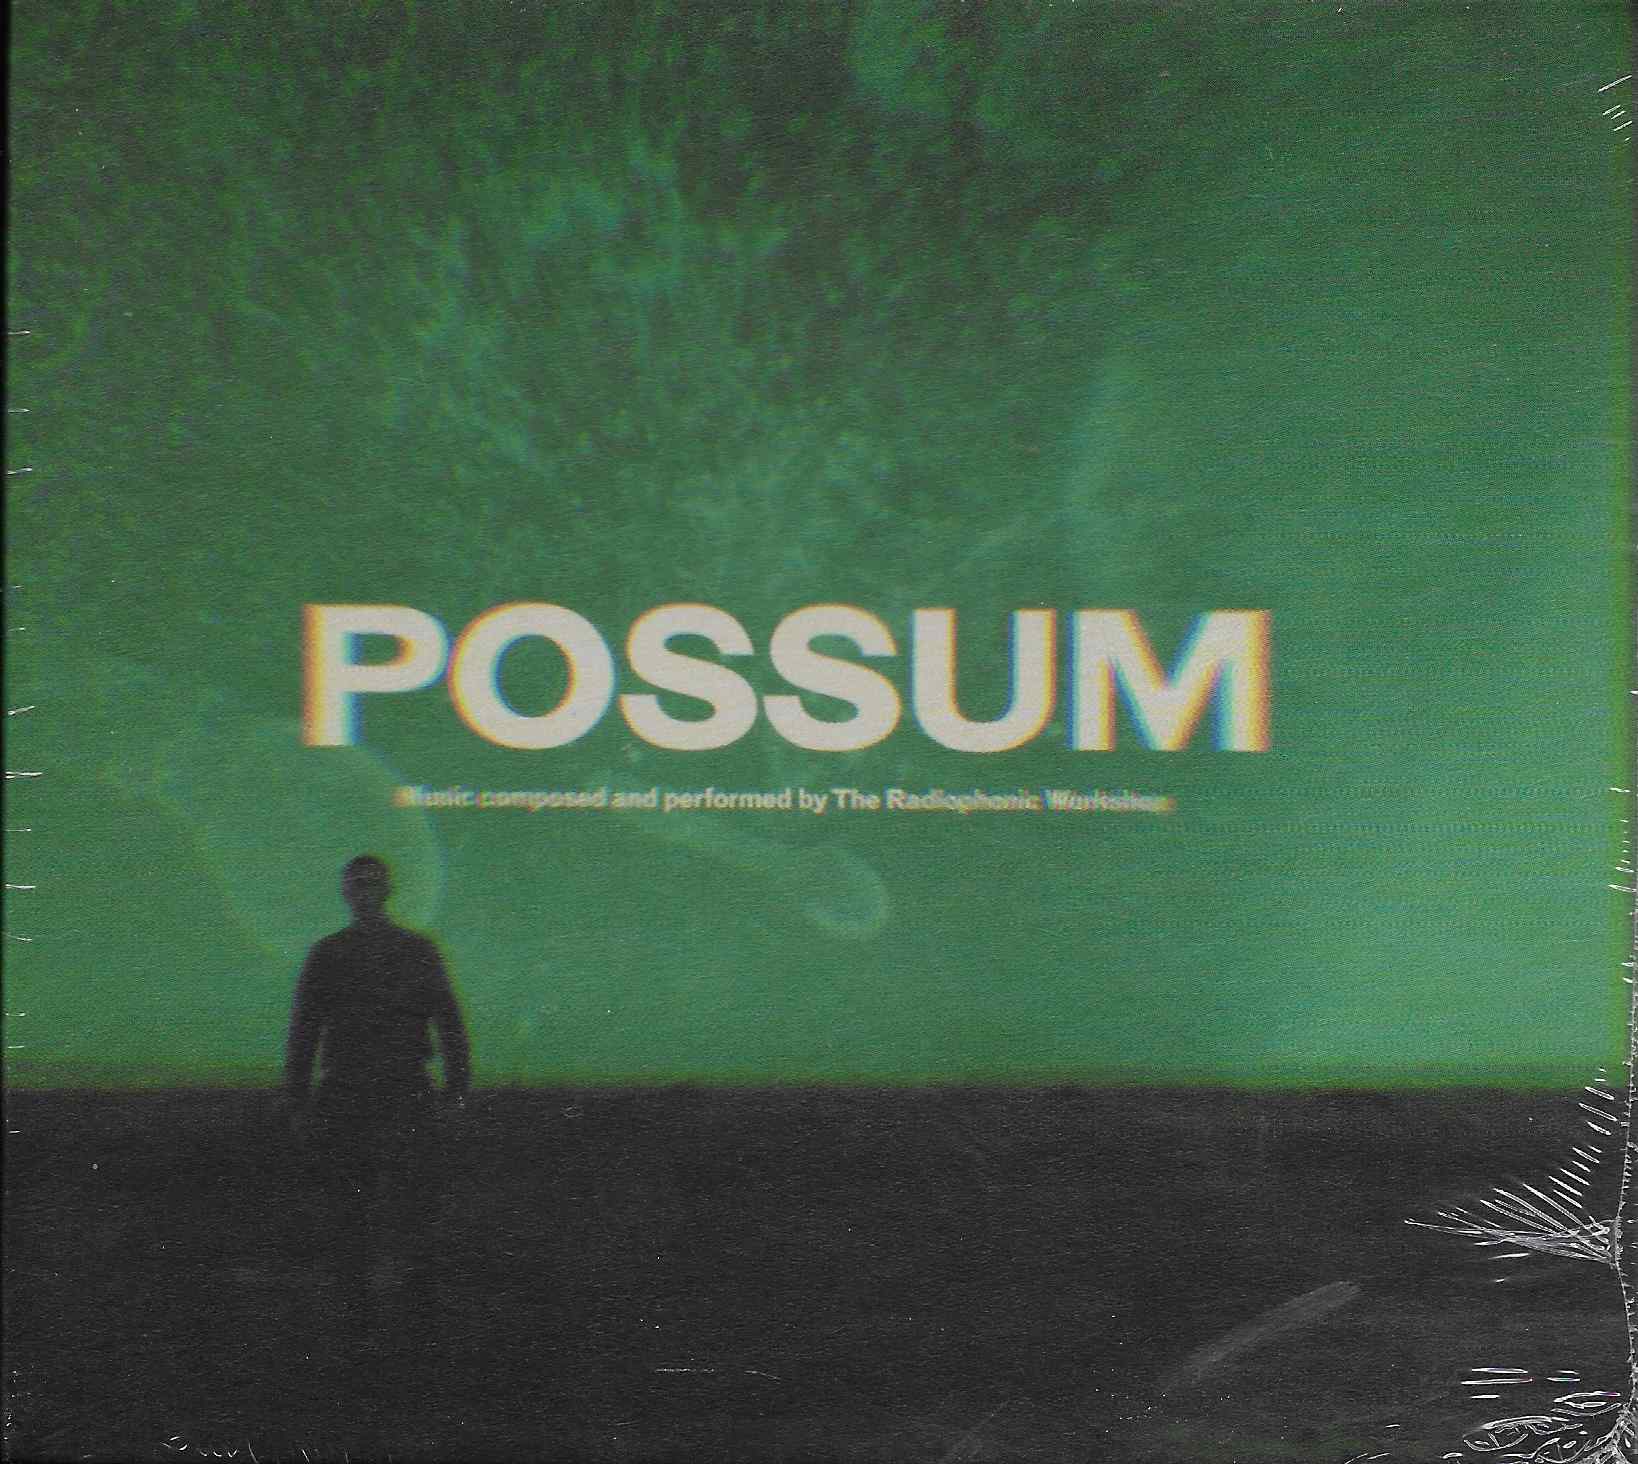 Picture of Possum by artist The Radiophonic Workshop from ITV, Channel 4 and Channel 5 cds library